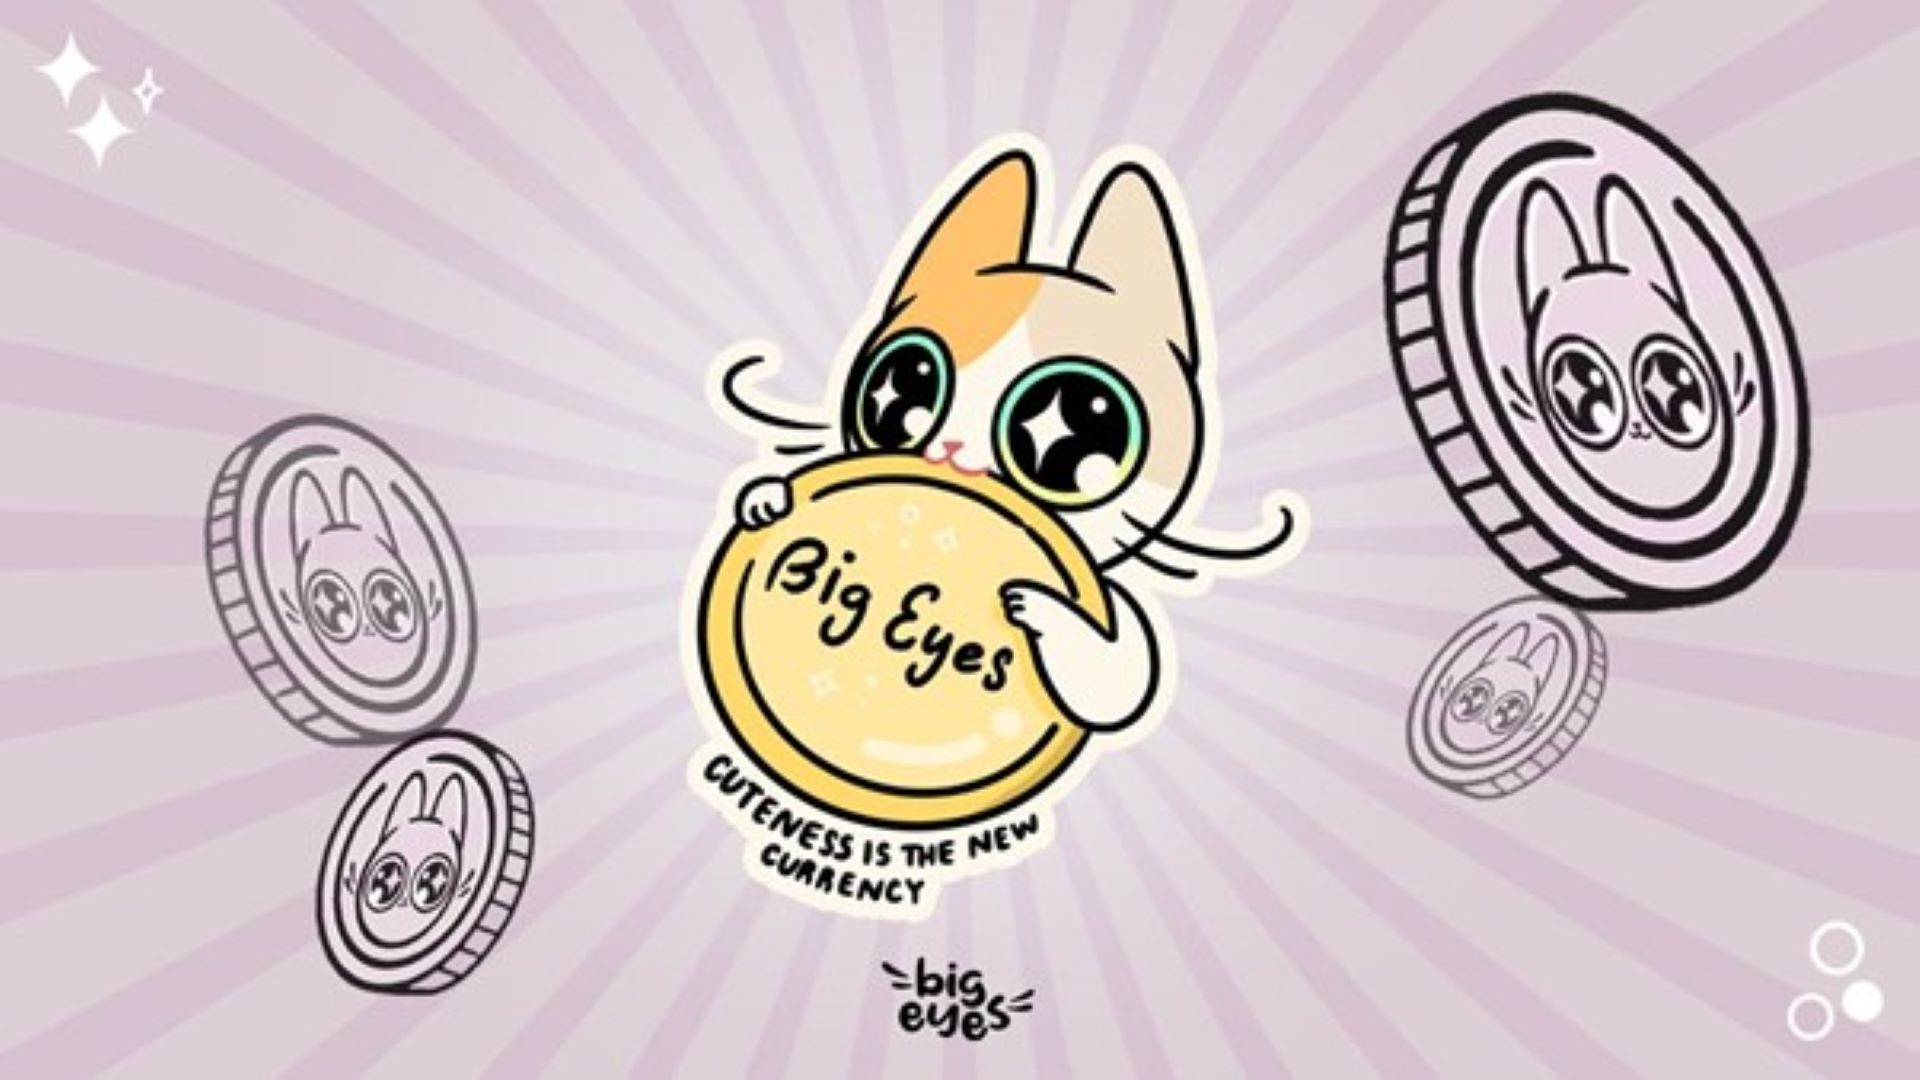 As Ethereum and Dogecoin Plummet, Will Big Eyes Coin Become A Safe Haven For The Crypto Community?